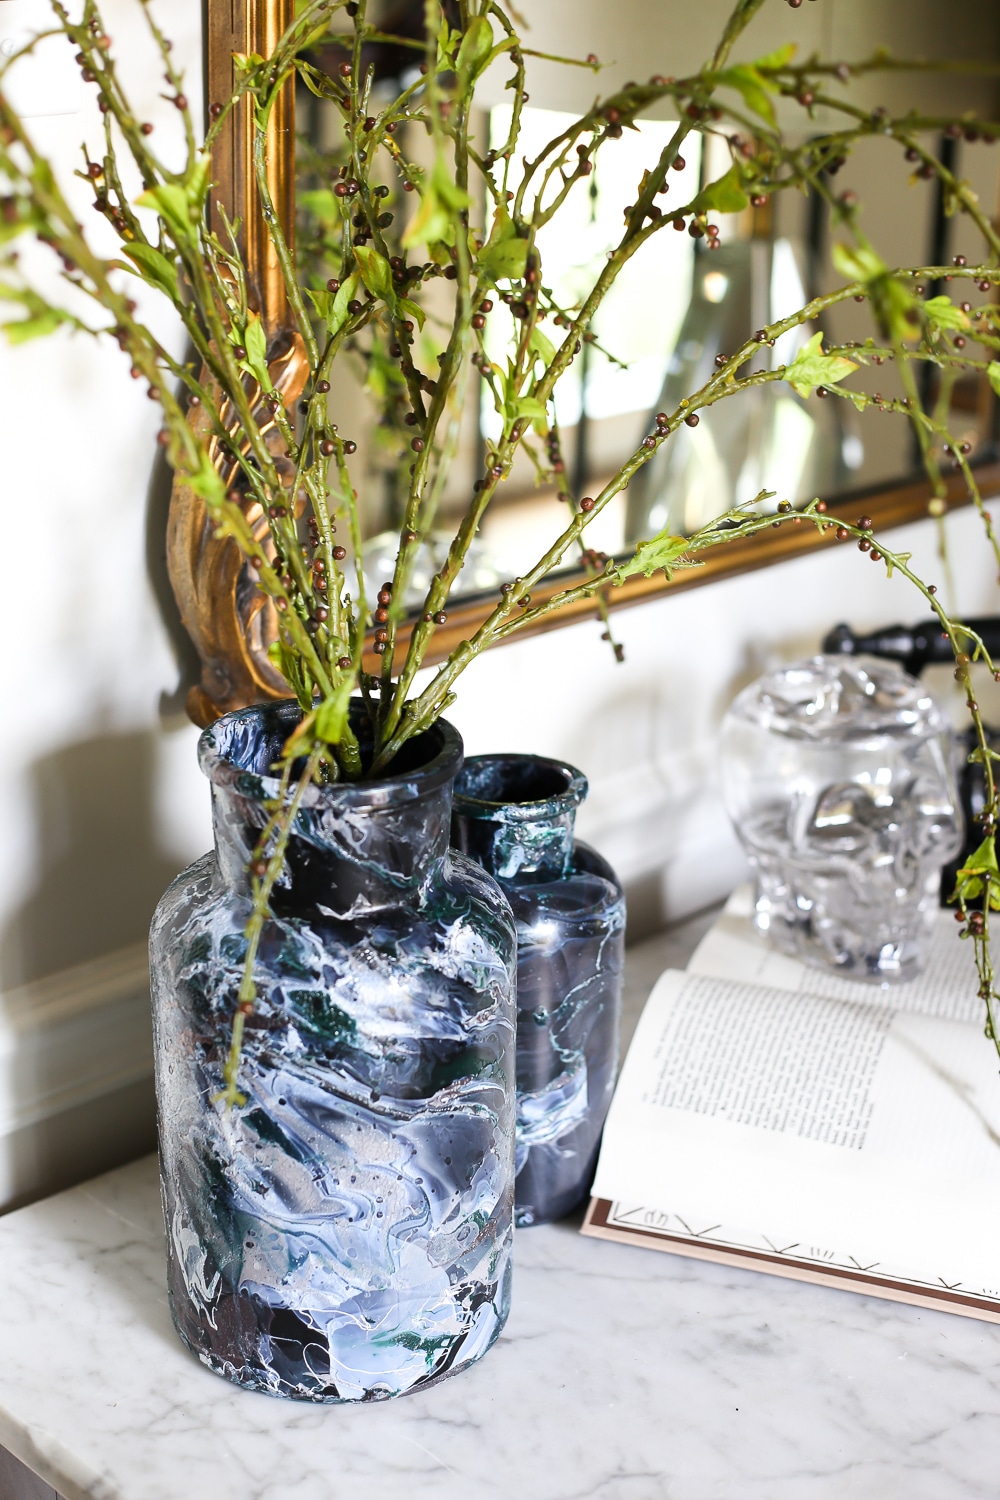 DIY Black Marbled Vases are the perfect understated, not scary Halloween decor!